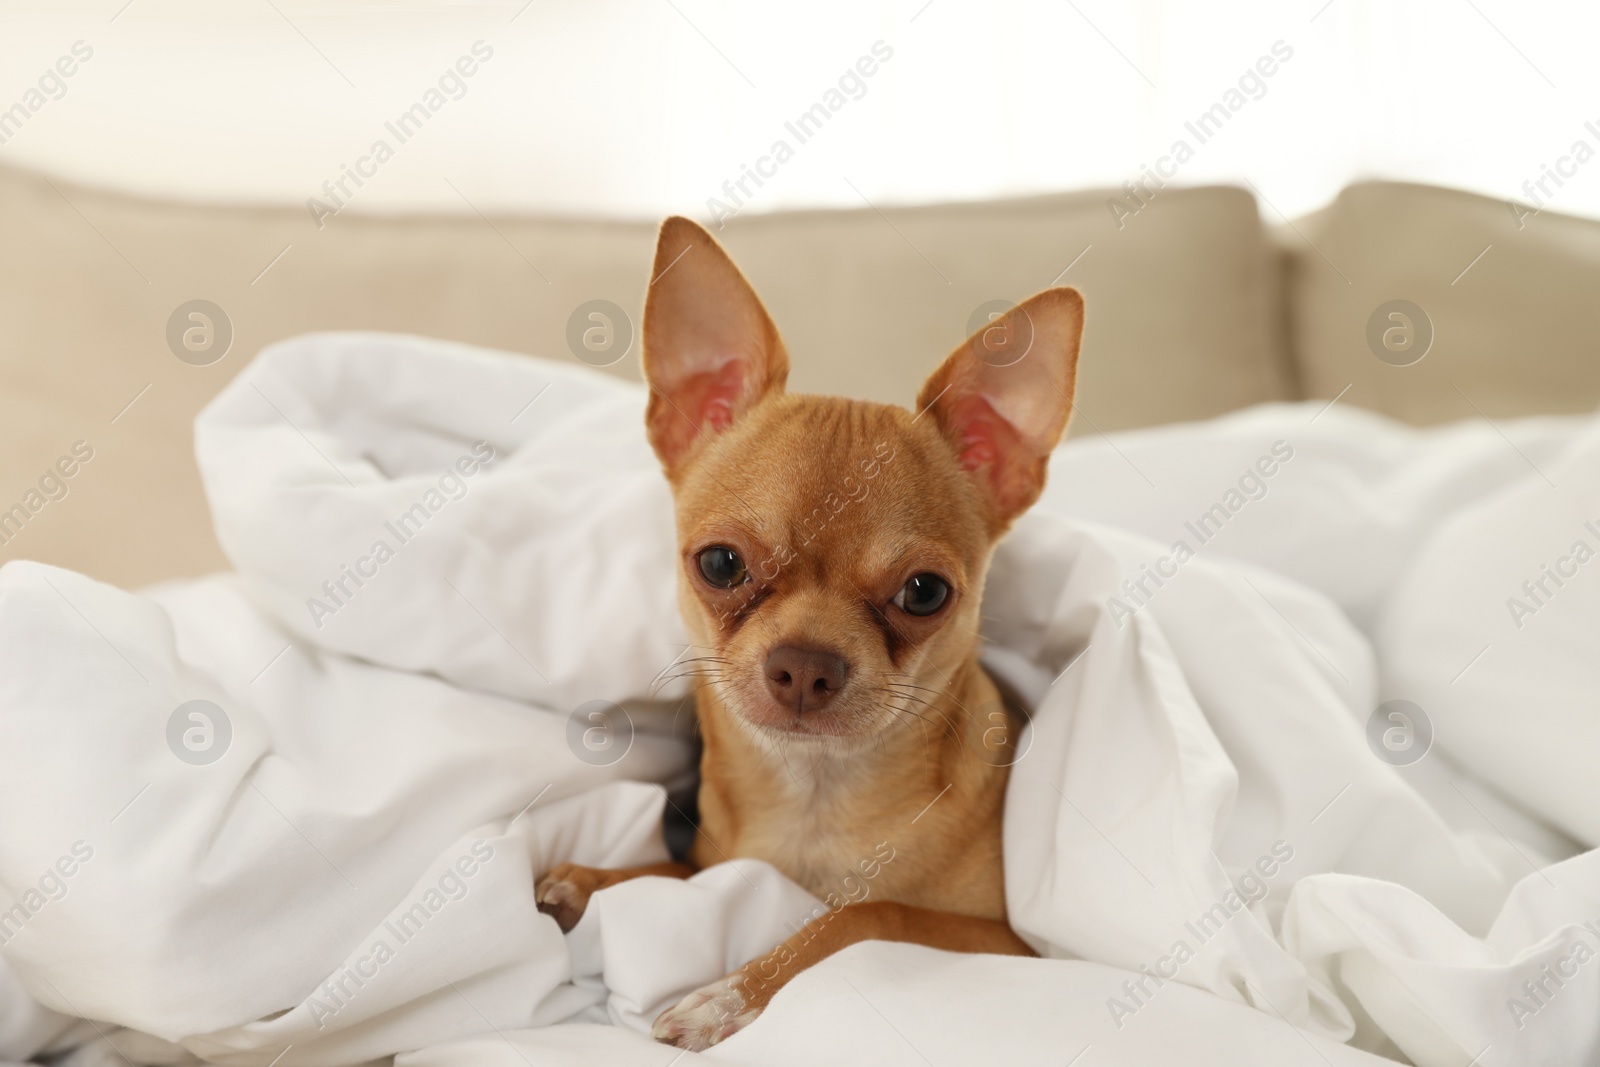 Photo of Cute Chihuahua dog under blanket at home